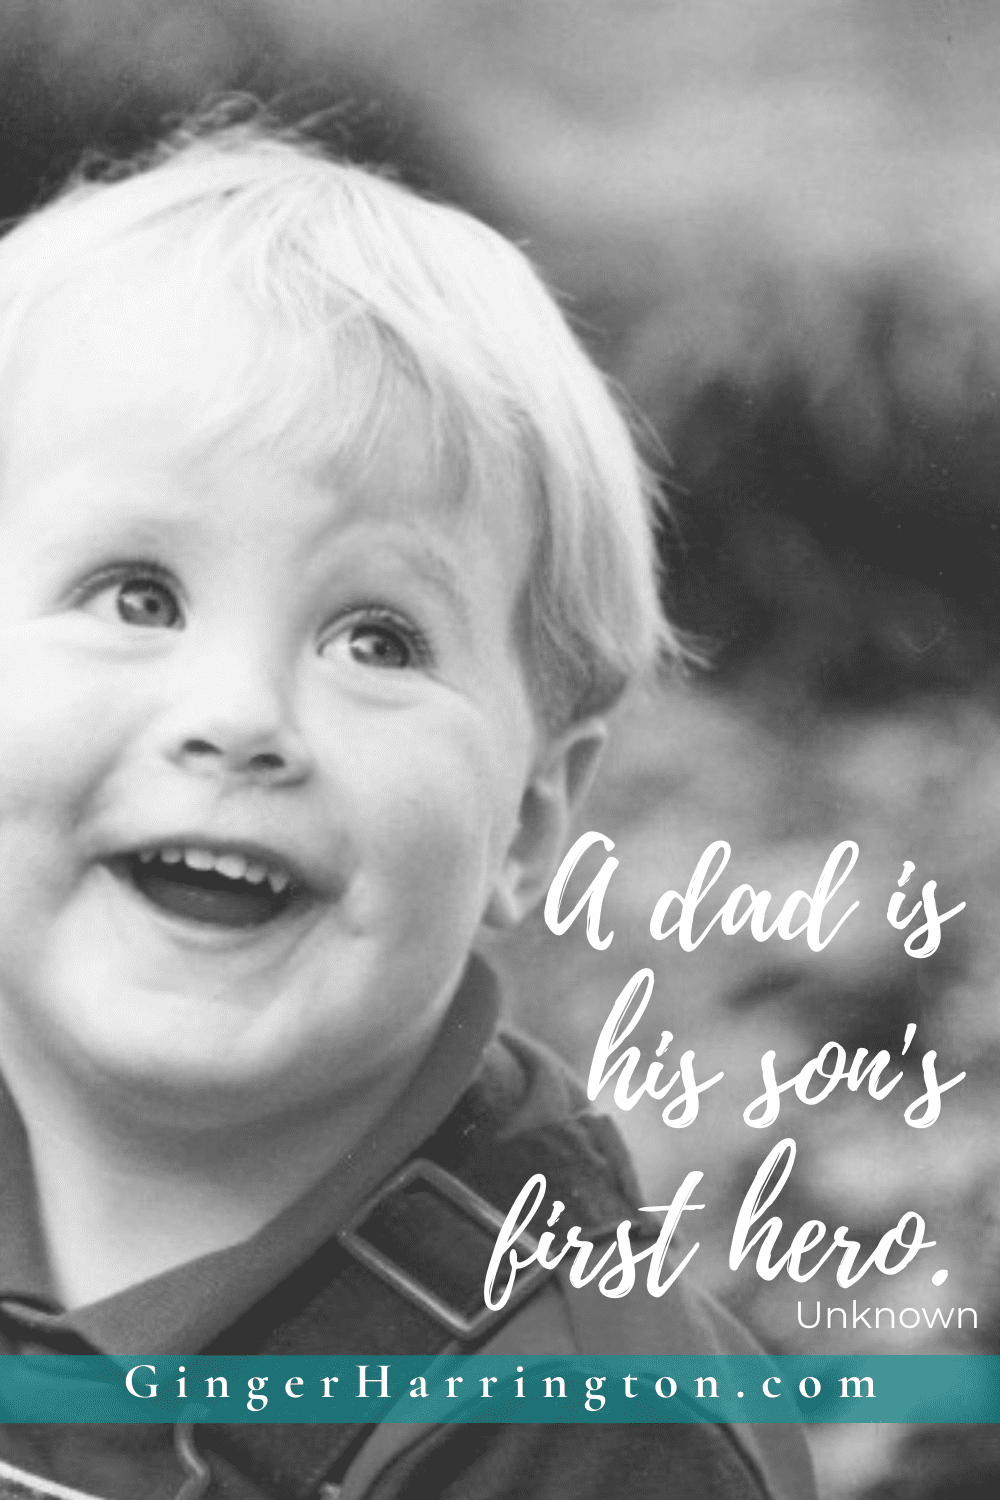 "A dad is his son's first hero." Father's make a valuable difference in a child's life. Leave a legacy of love and faith to your children. Free printable prayers for dads.